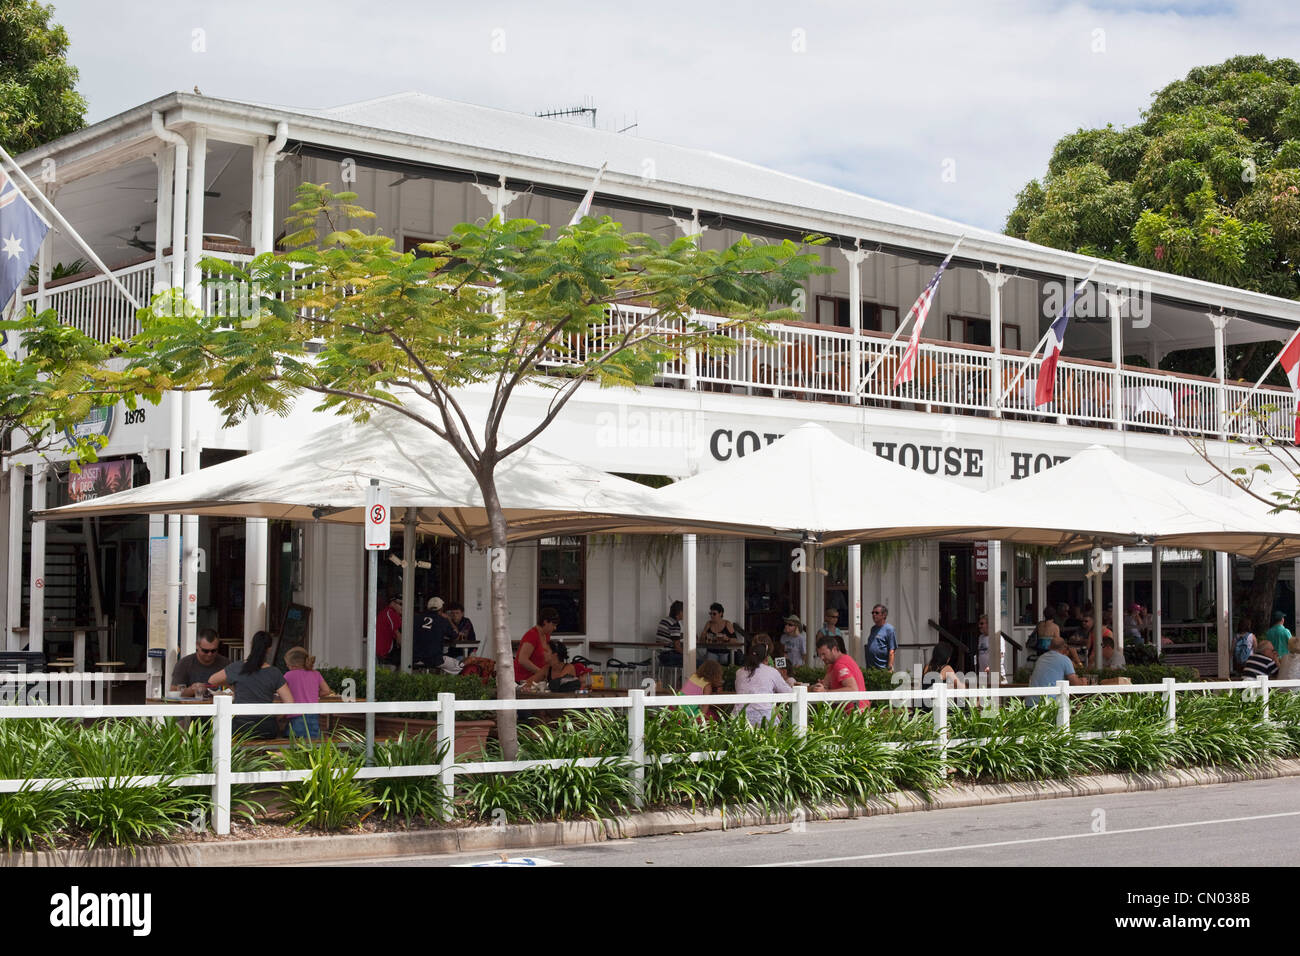 The historic Court House Hotel - a popular drinking and dining spot. Port Douglas, Queensland, Australia Stock Photo